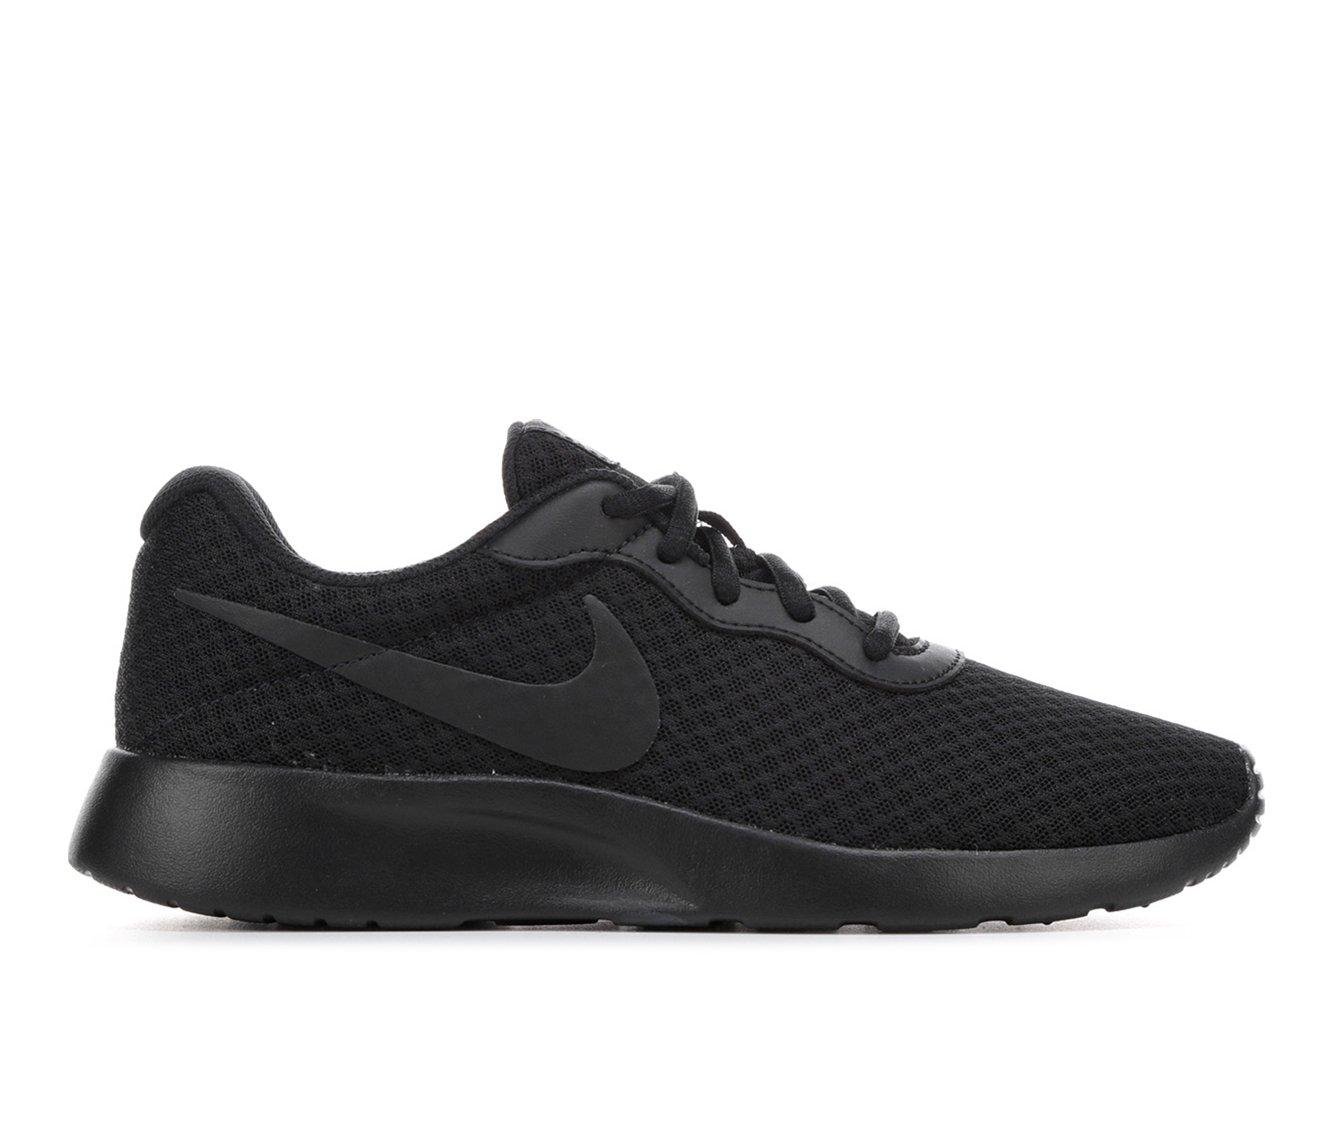 Traer sueño sin cable Women's Nike Shoes, Air Max | Shoe Carnival